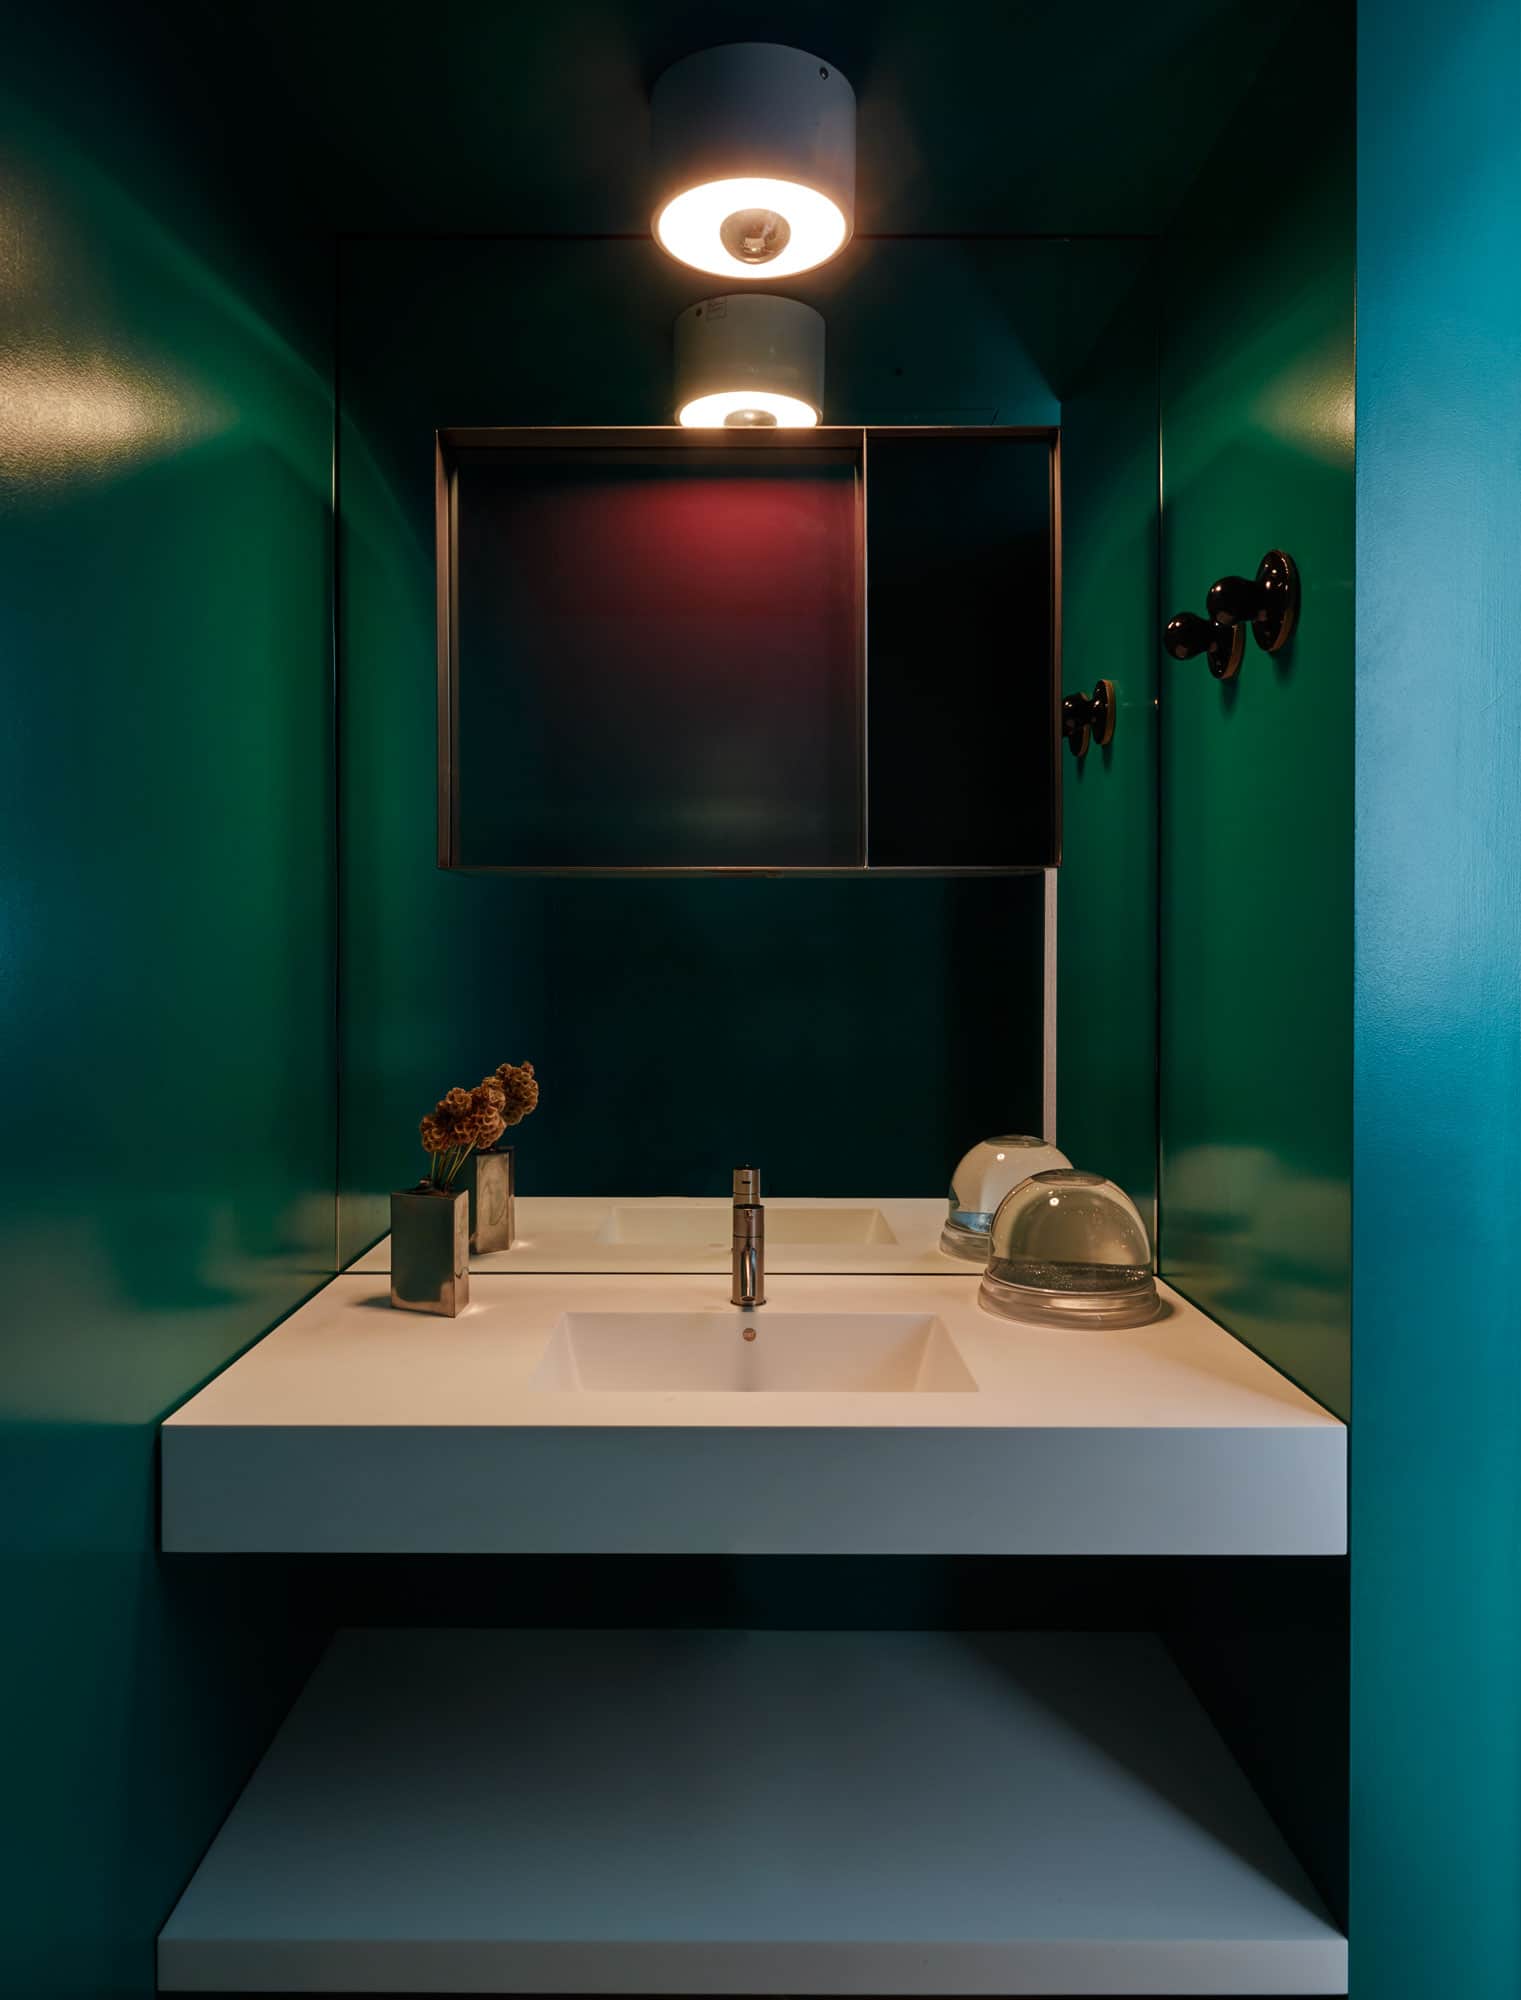 Designed by Carol Egan, this image is a detail shot of a color blocked powder room in a dramatic forest Green painted finish.  There is one source of light shown reflected in the fragmented mirror by Françoise Turner-Larcade.  The light fixture is a flush mount Light by Cini Boeri.  There is a white Corian sink vanity which contrasts the green walls and ceiling. The black ceramic hooks for hand towels are made by M. Crow